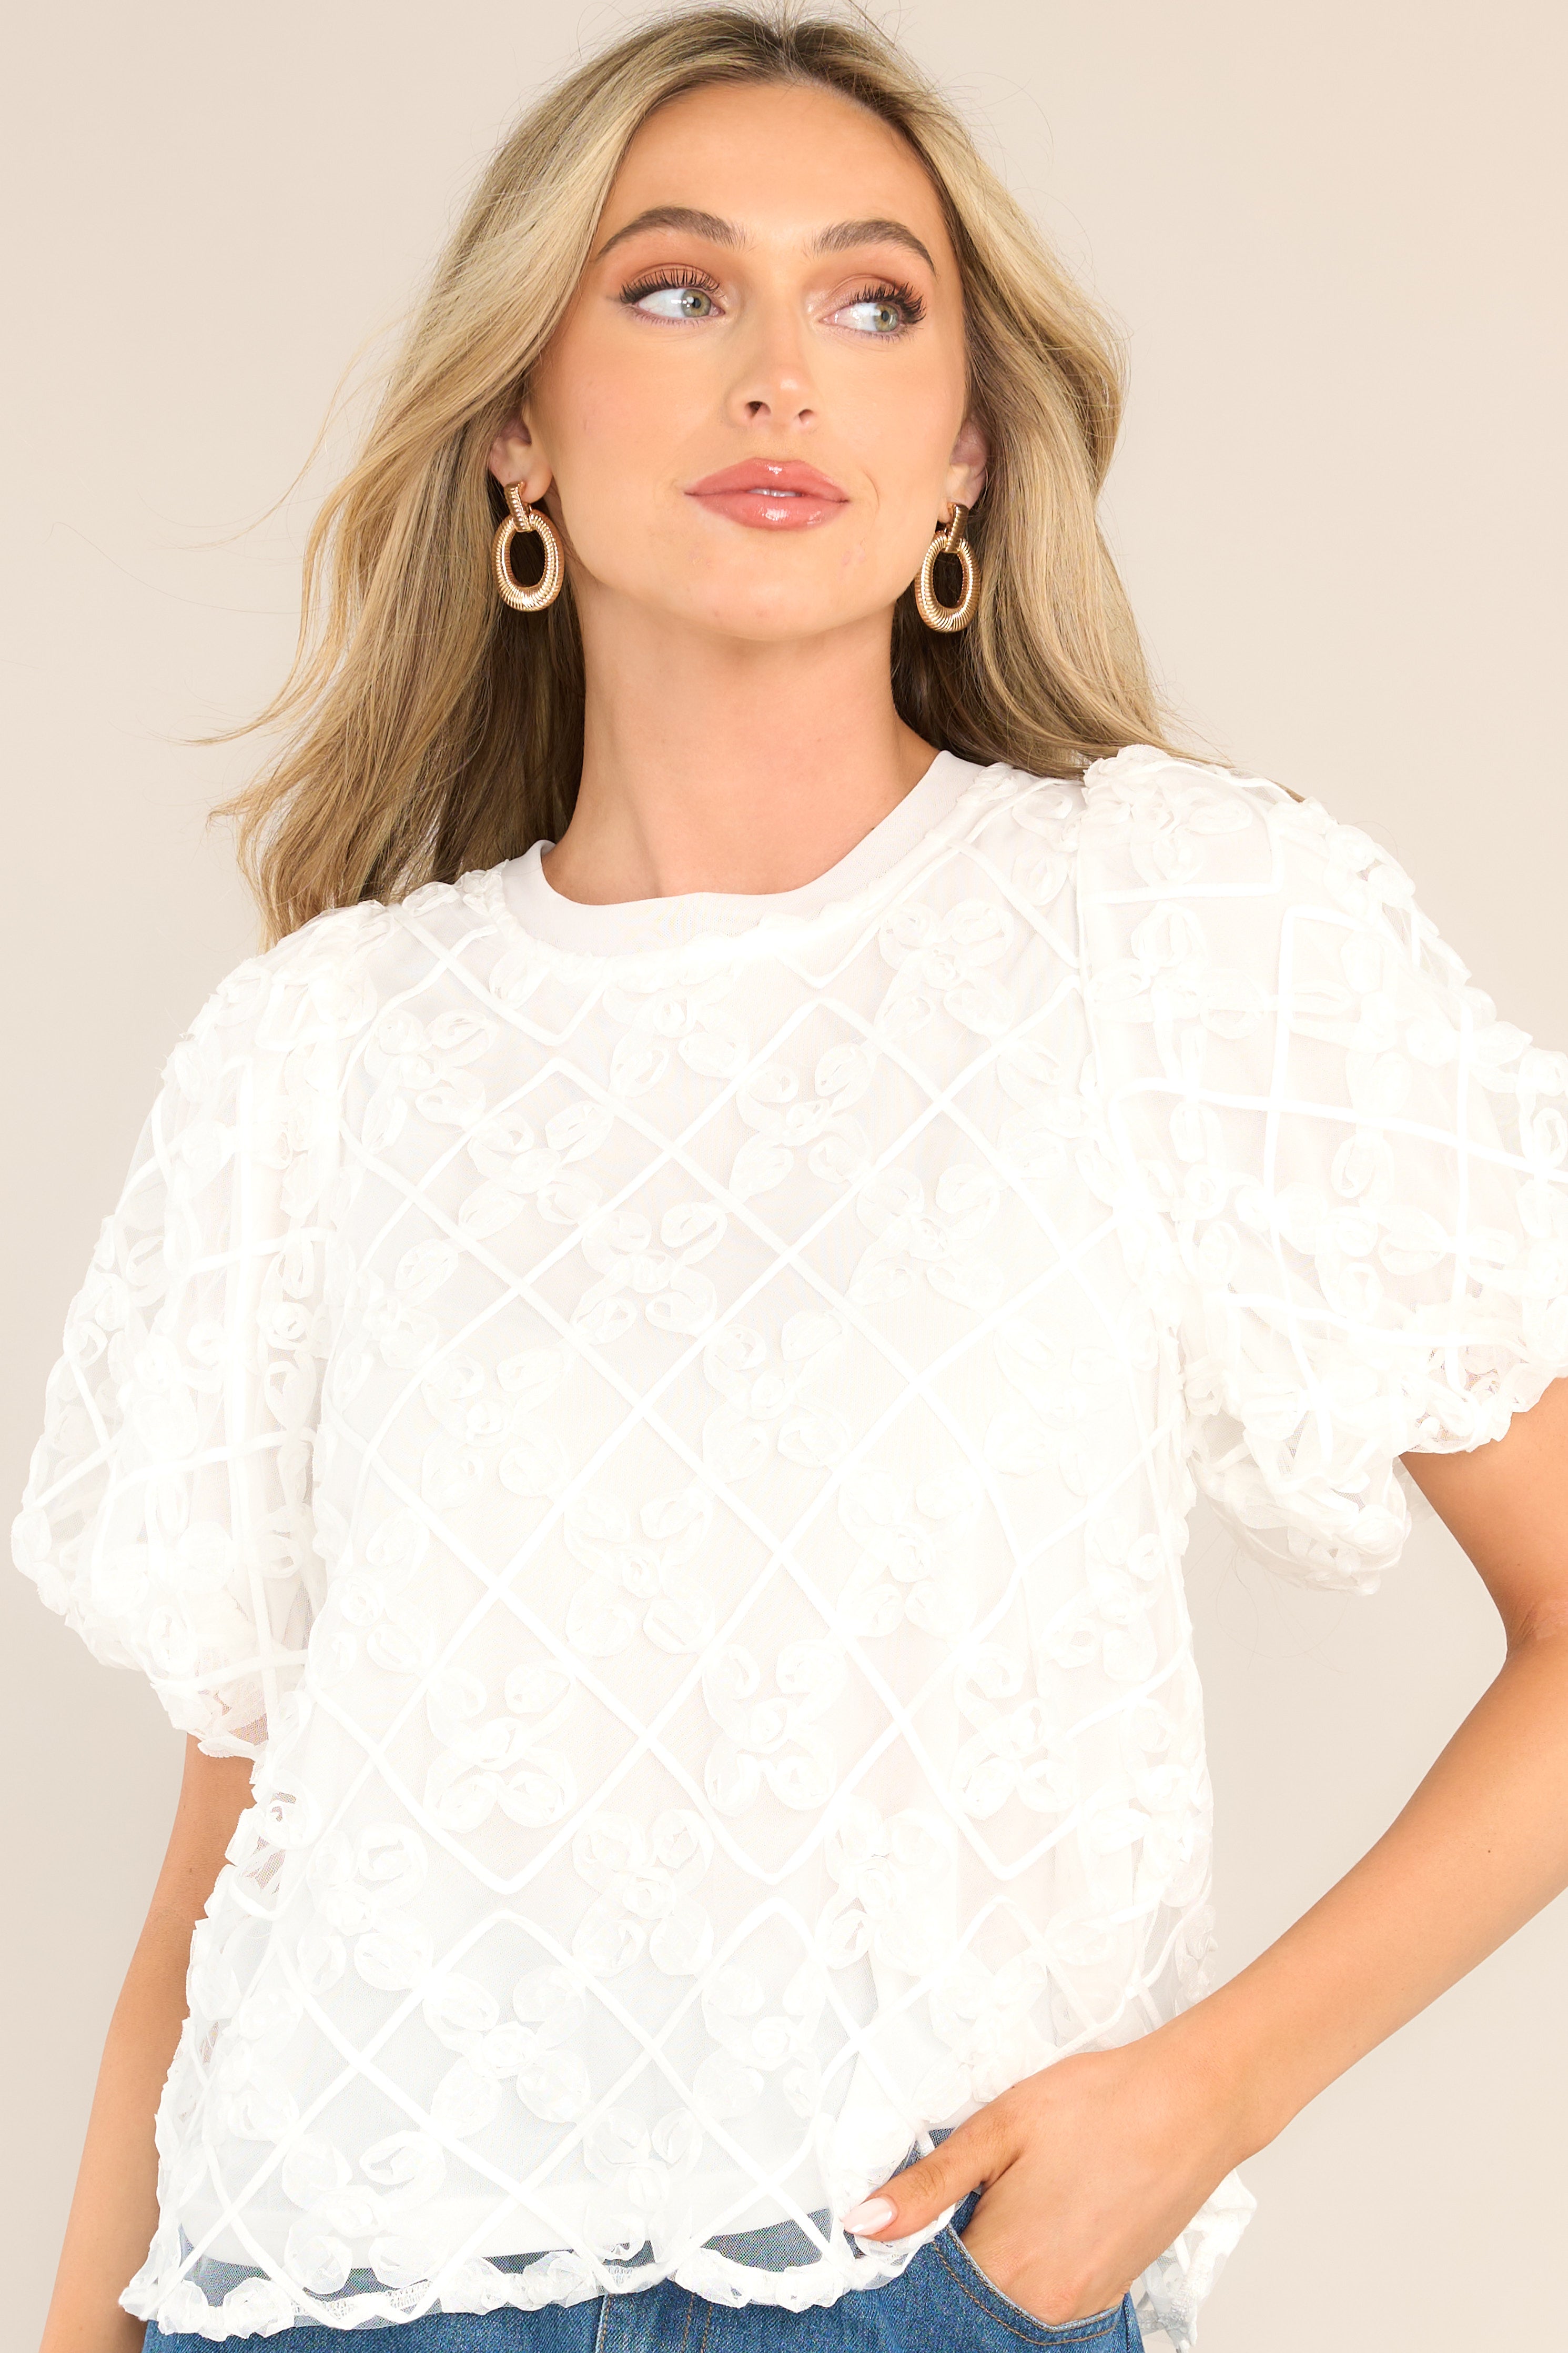 Front view of this top that features a crew neckline, a self-tie feature at the back of the neck and a textured lace pattern.